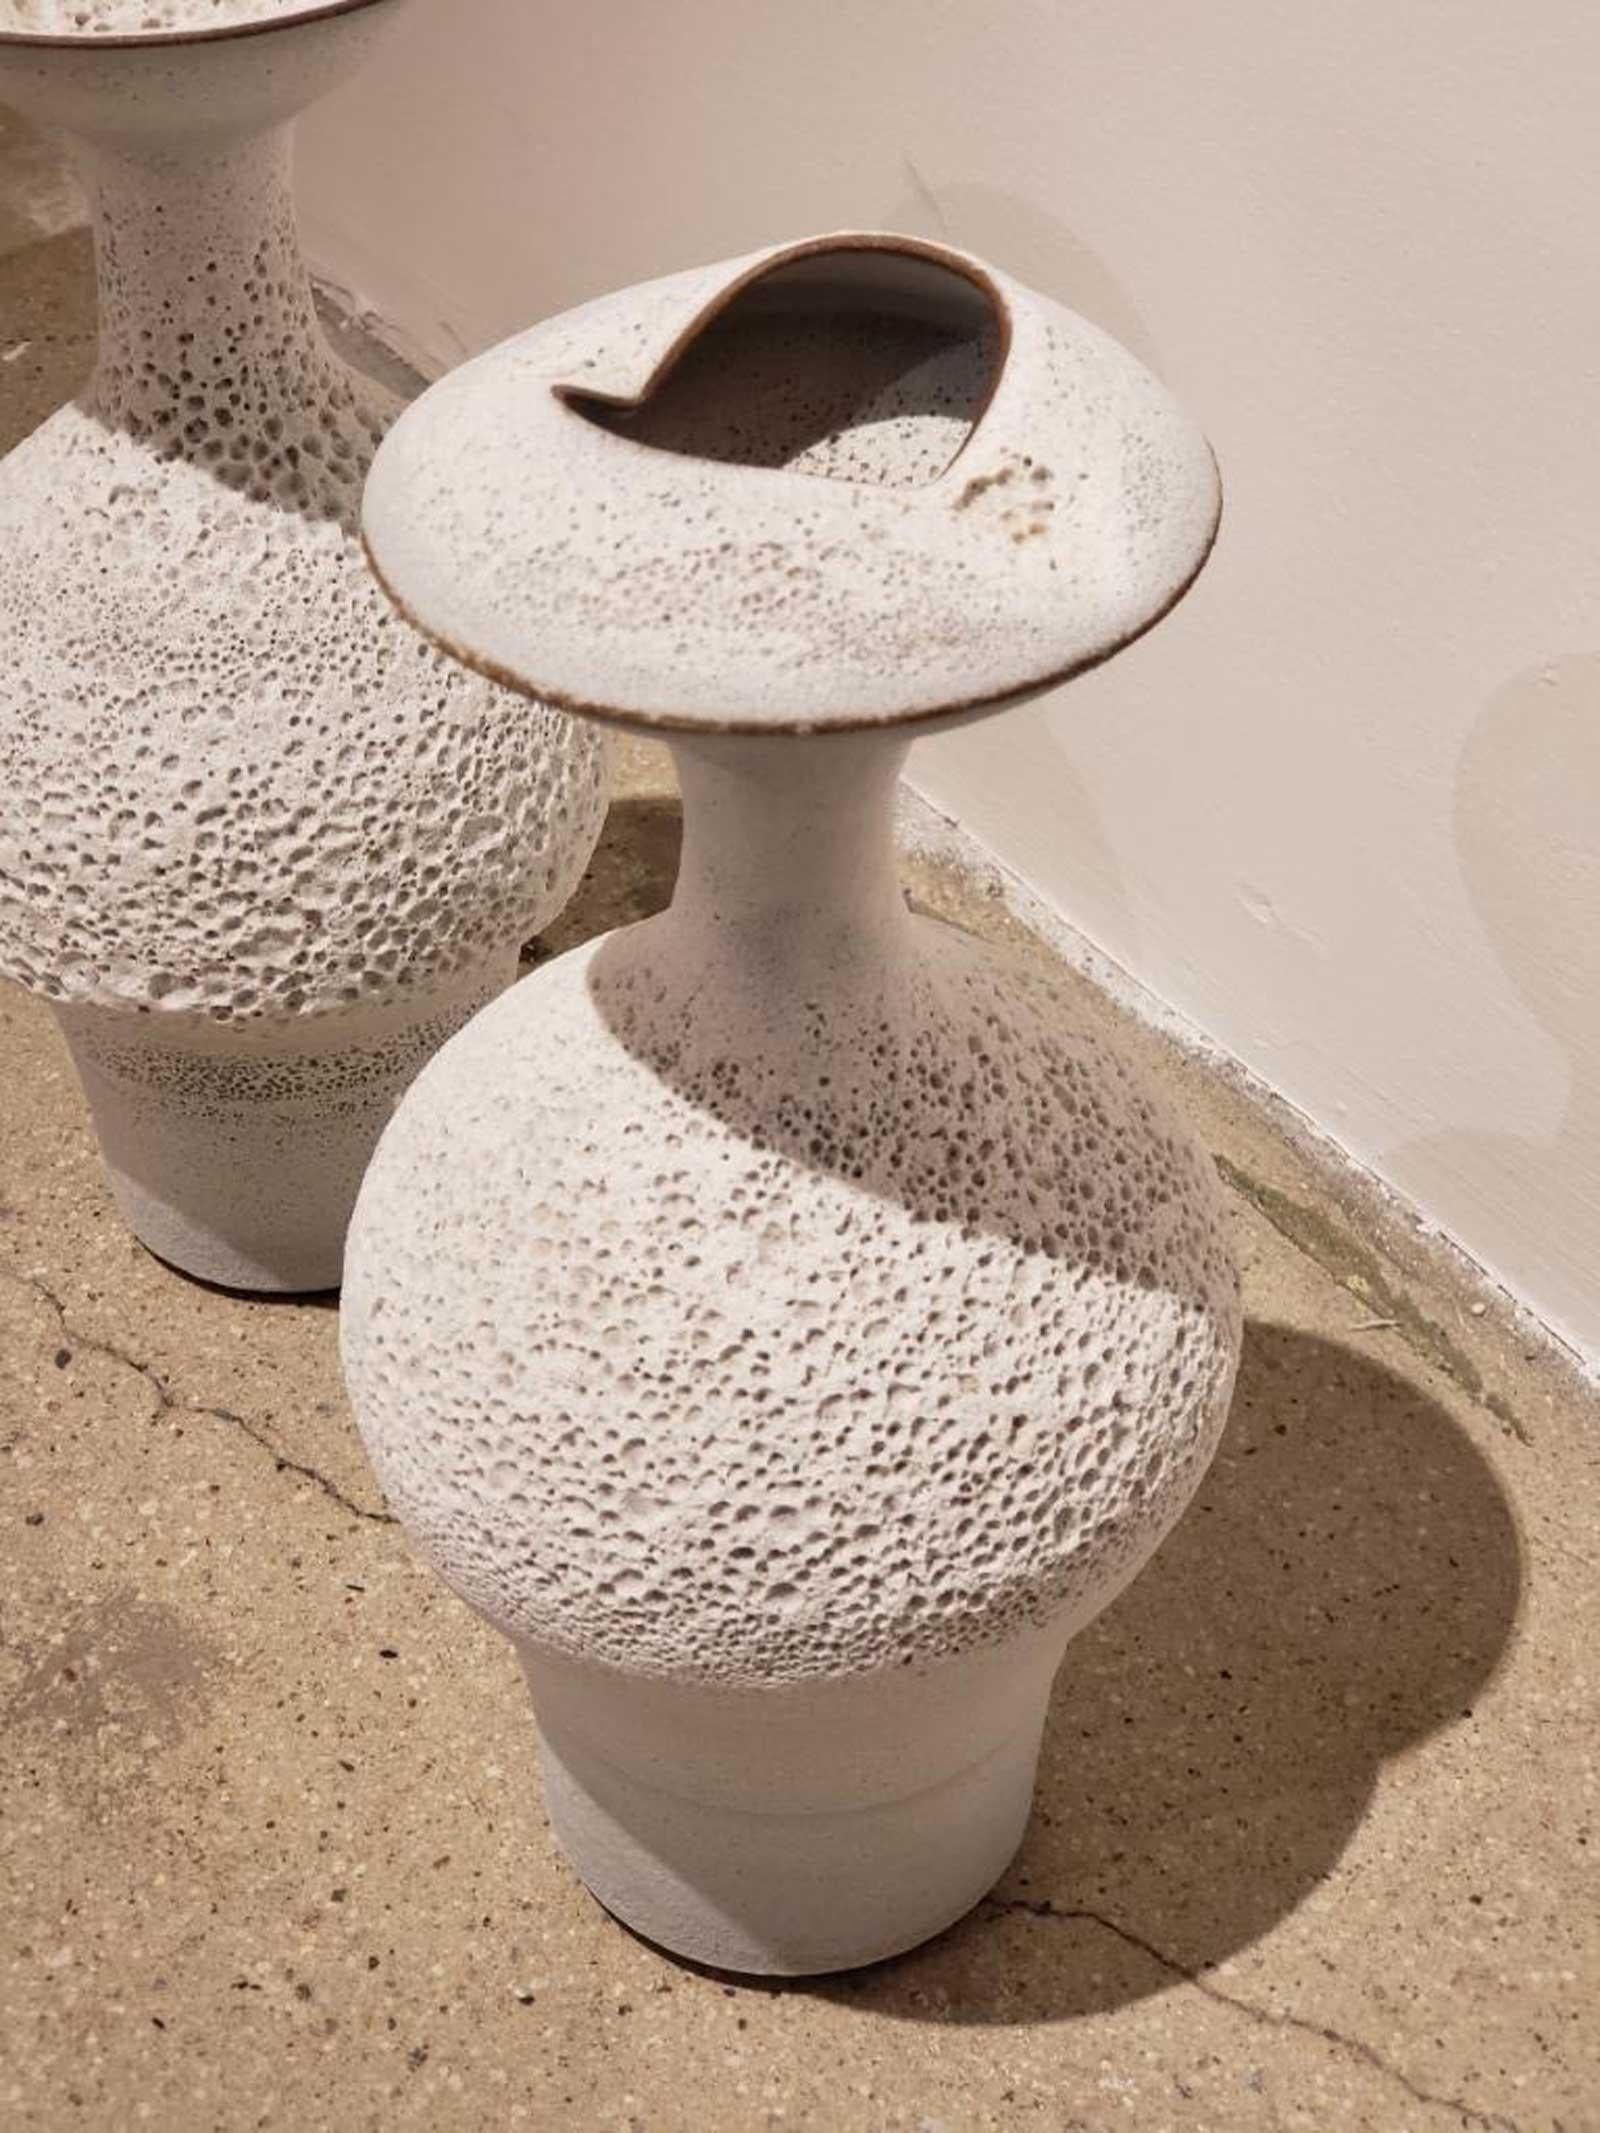 Beautiful ceramic vessels by Jeremy Briddell. 

Jeremy Briddell grew up in St. Louis Missouri but has lived in Pennsylvania, Kansas City, Omaha Nebraska and for the last 17 years Arizona. He did his undergraduate study at The Kansas City Art